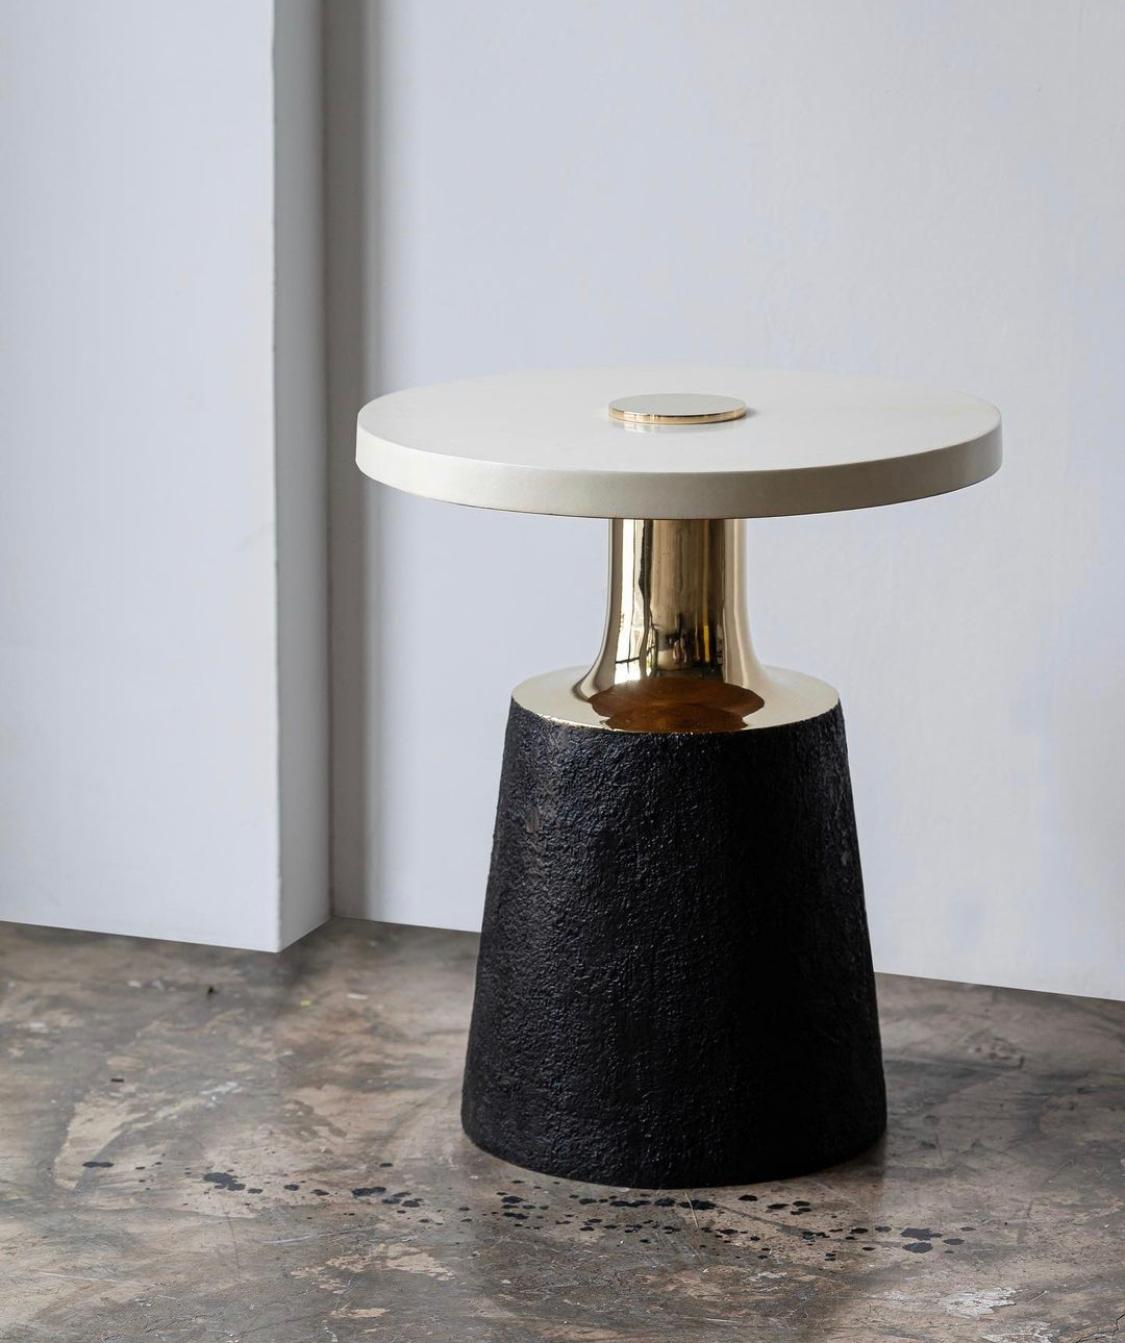 Bronze Necked Size Table with Parchment Top by Elan Atelier

Necked side table in cast bronze base with a dark textured and polished gold surface with a natural goatskin parchment top in our off-white Chablis color.

Custom sizes and alternate